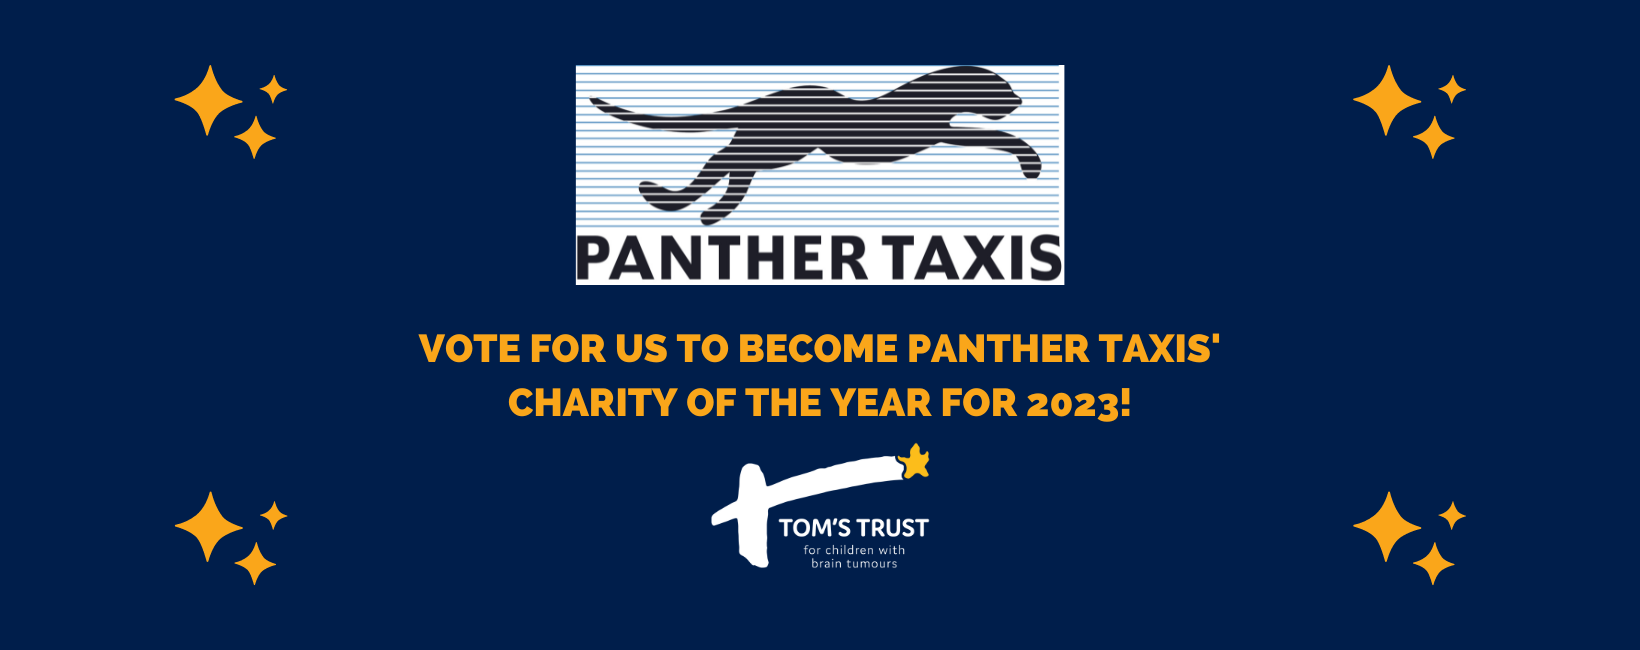 Vote for us to become Panther Taxis' charity of the year 2023.